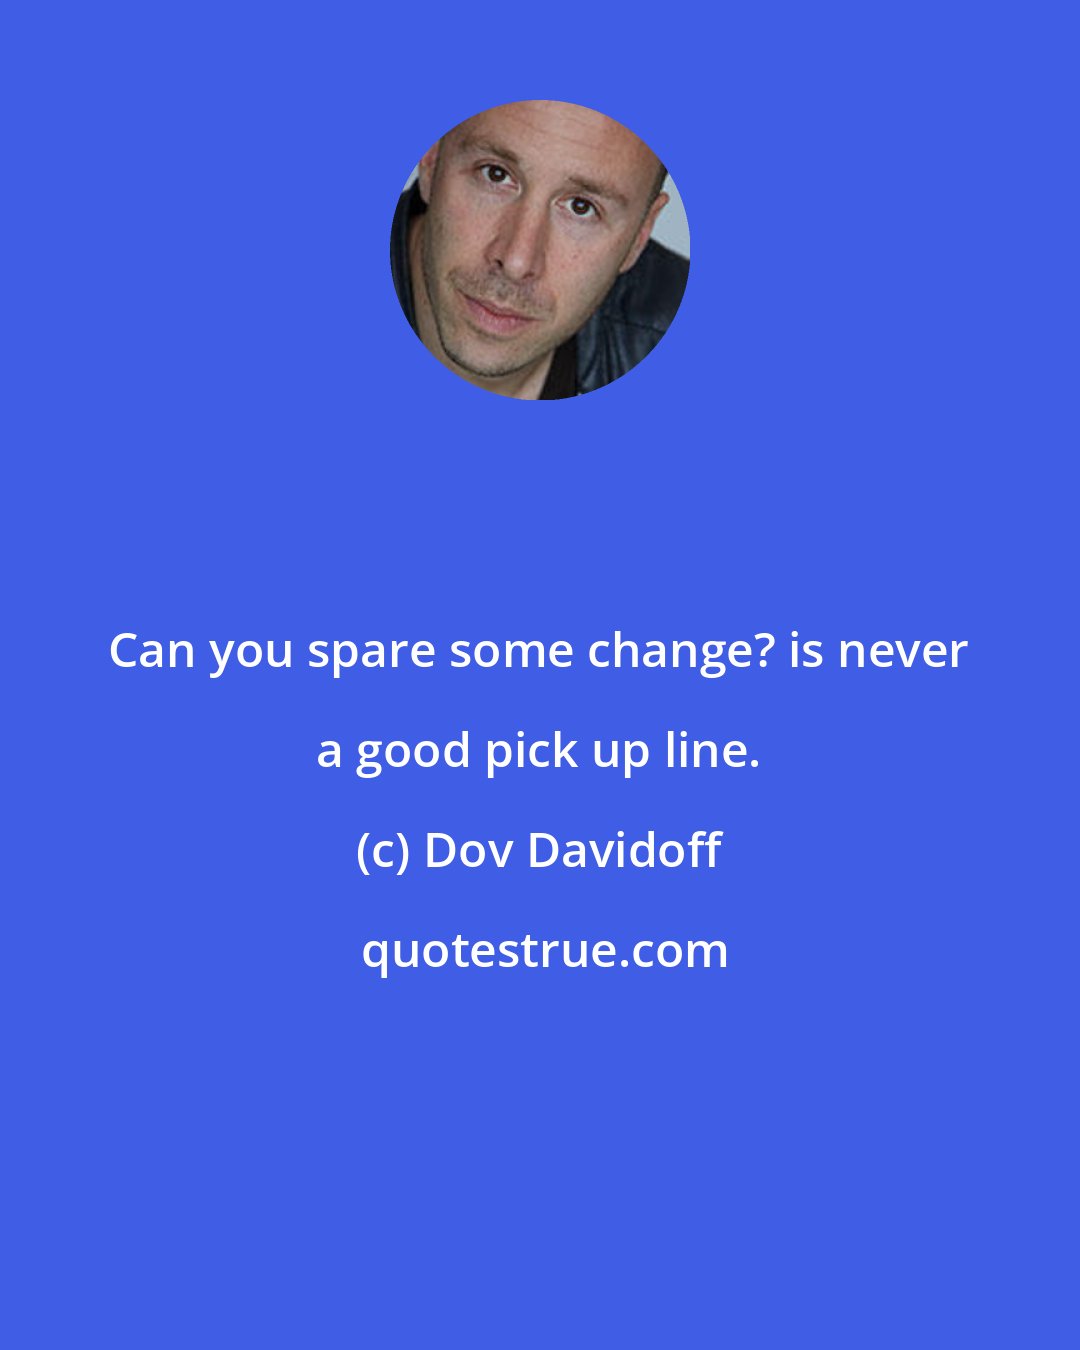 Dov Davidoff: Can you spare some change? is never a good pick up line.